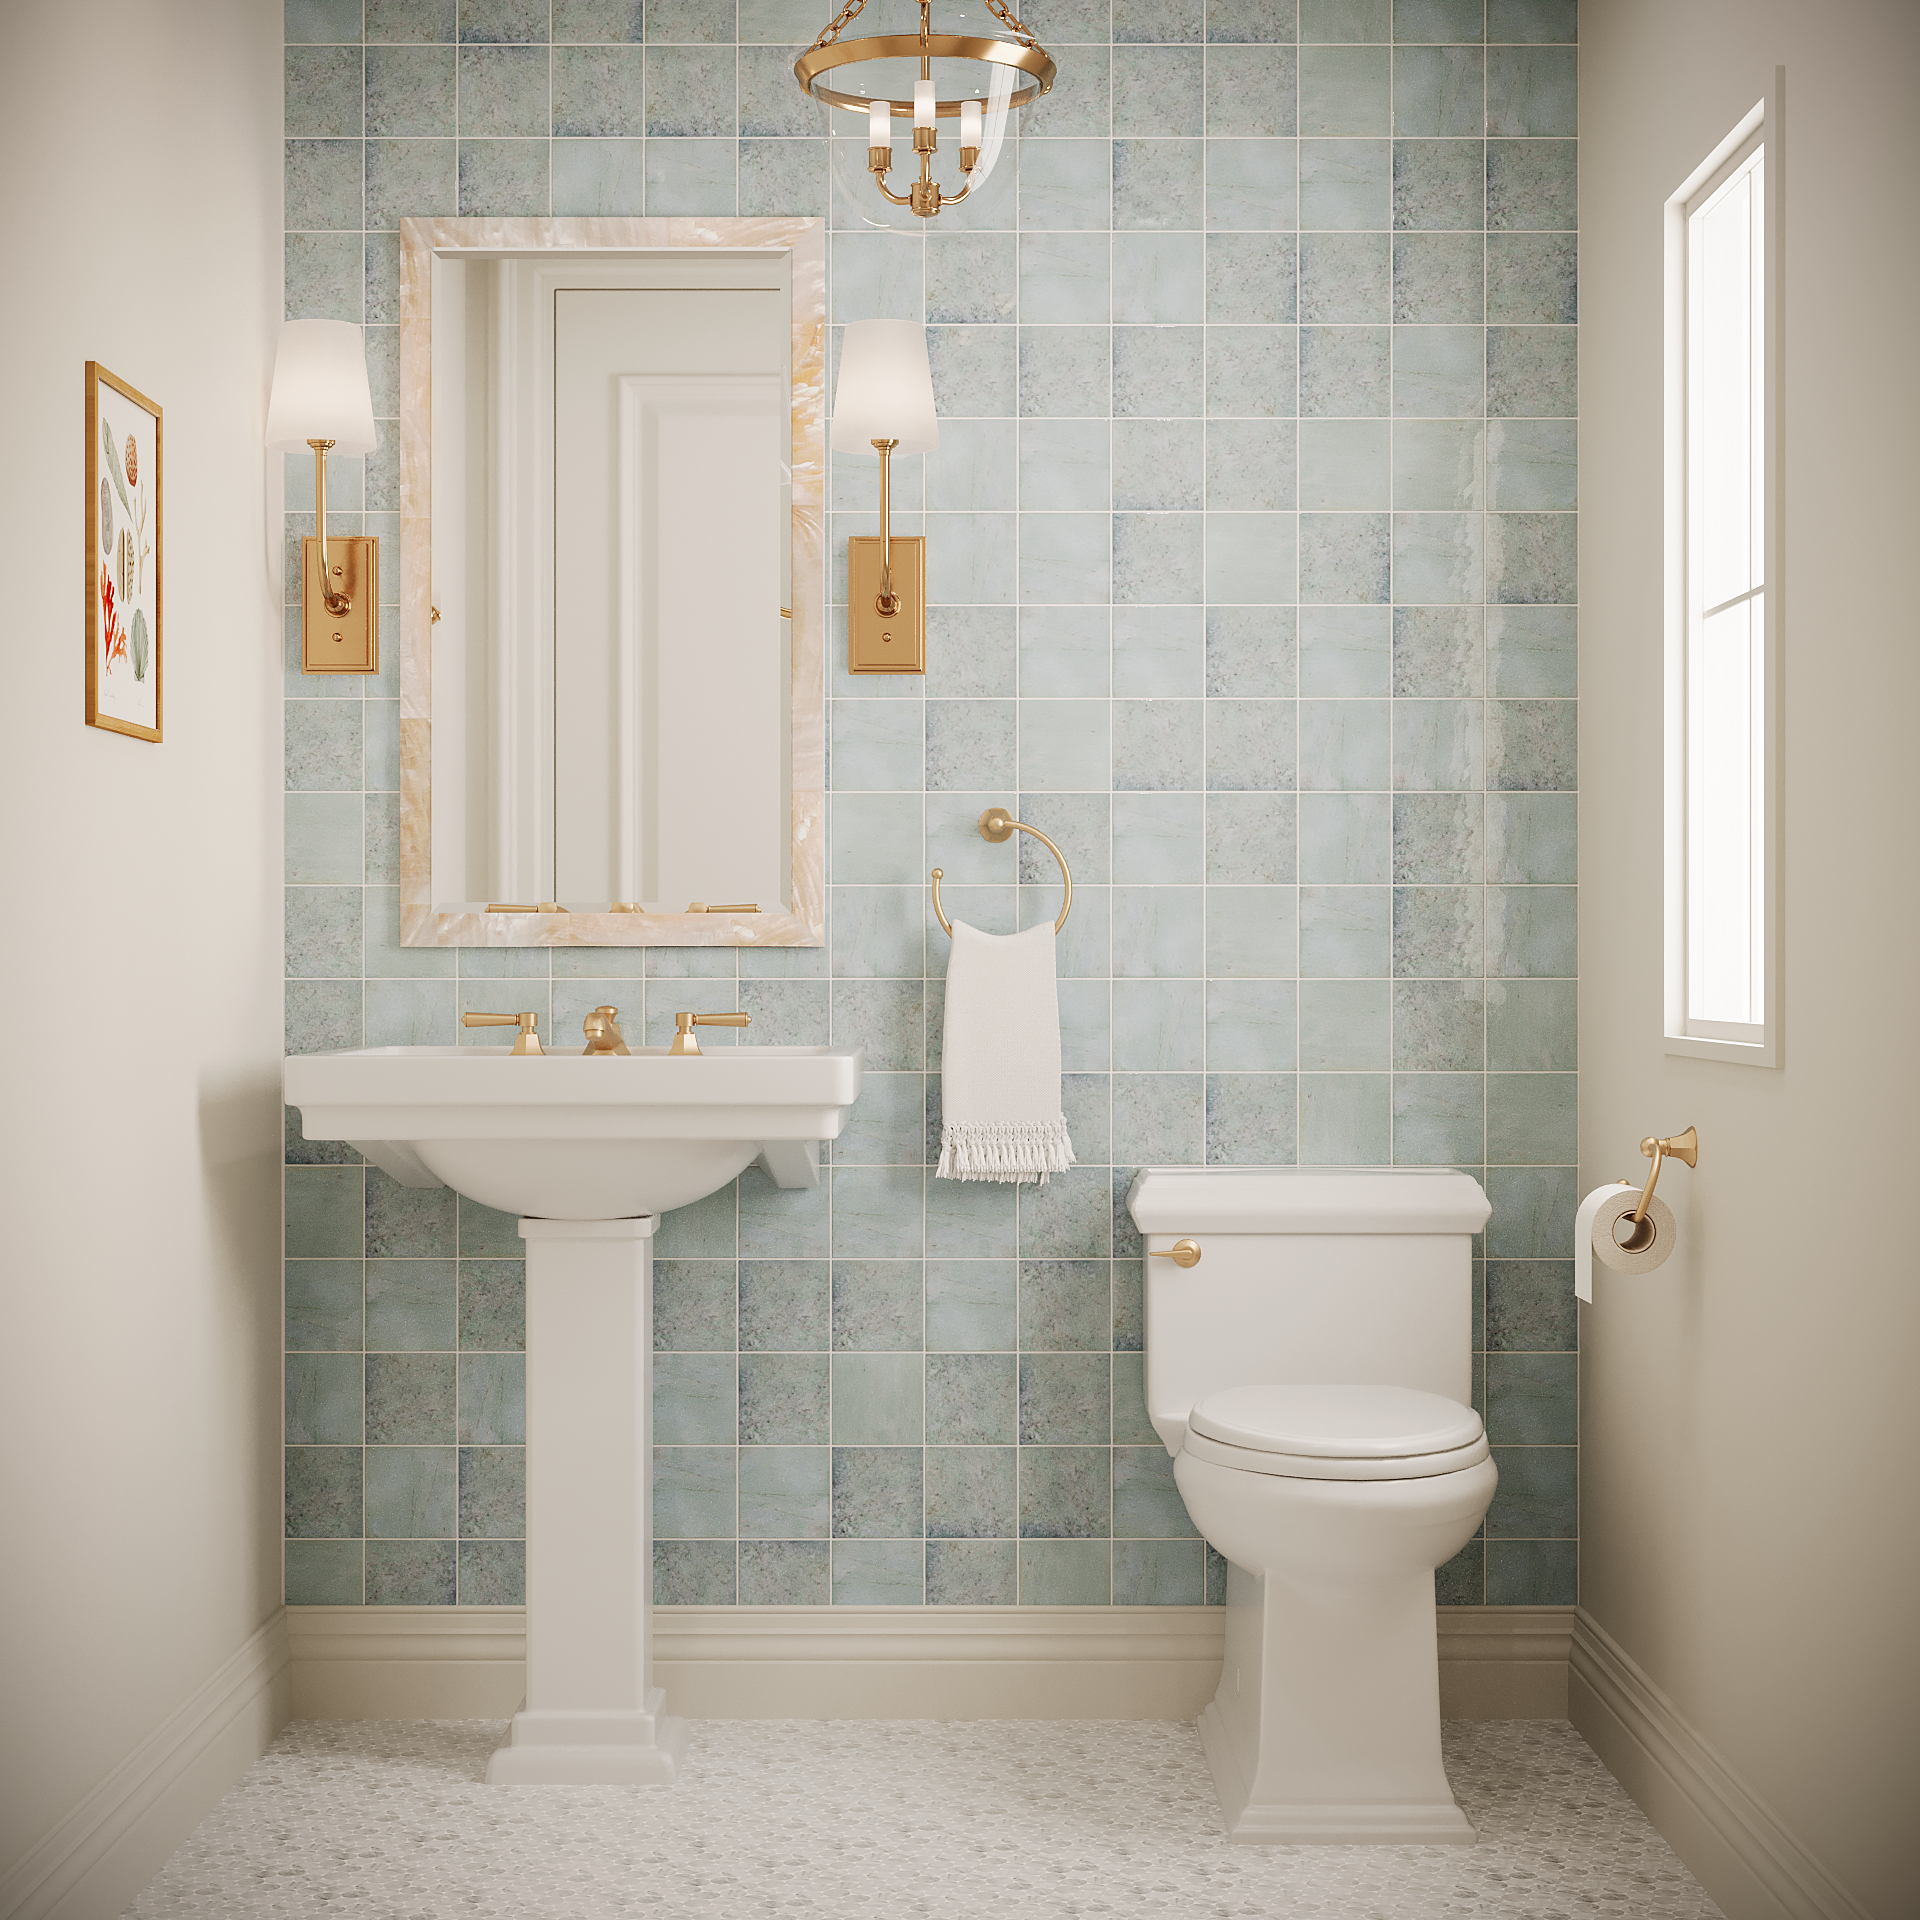 Jasper half bathroom collection with white pedestal sink and toilet and blue tile wall.